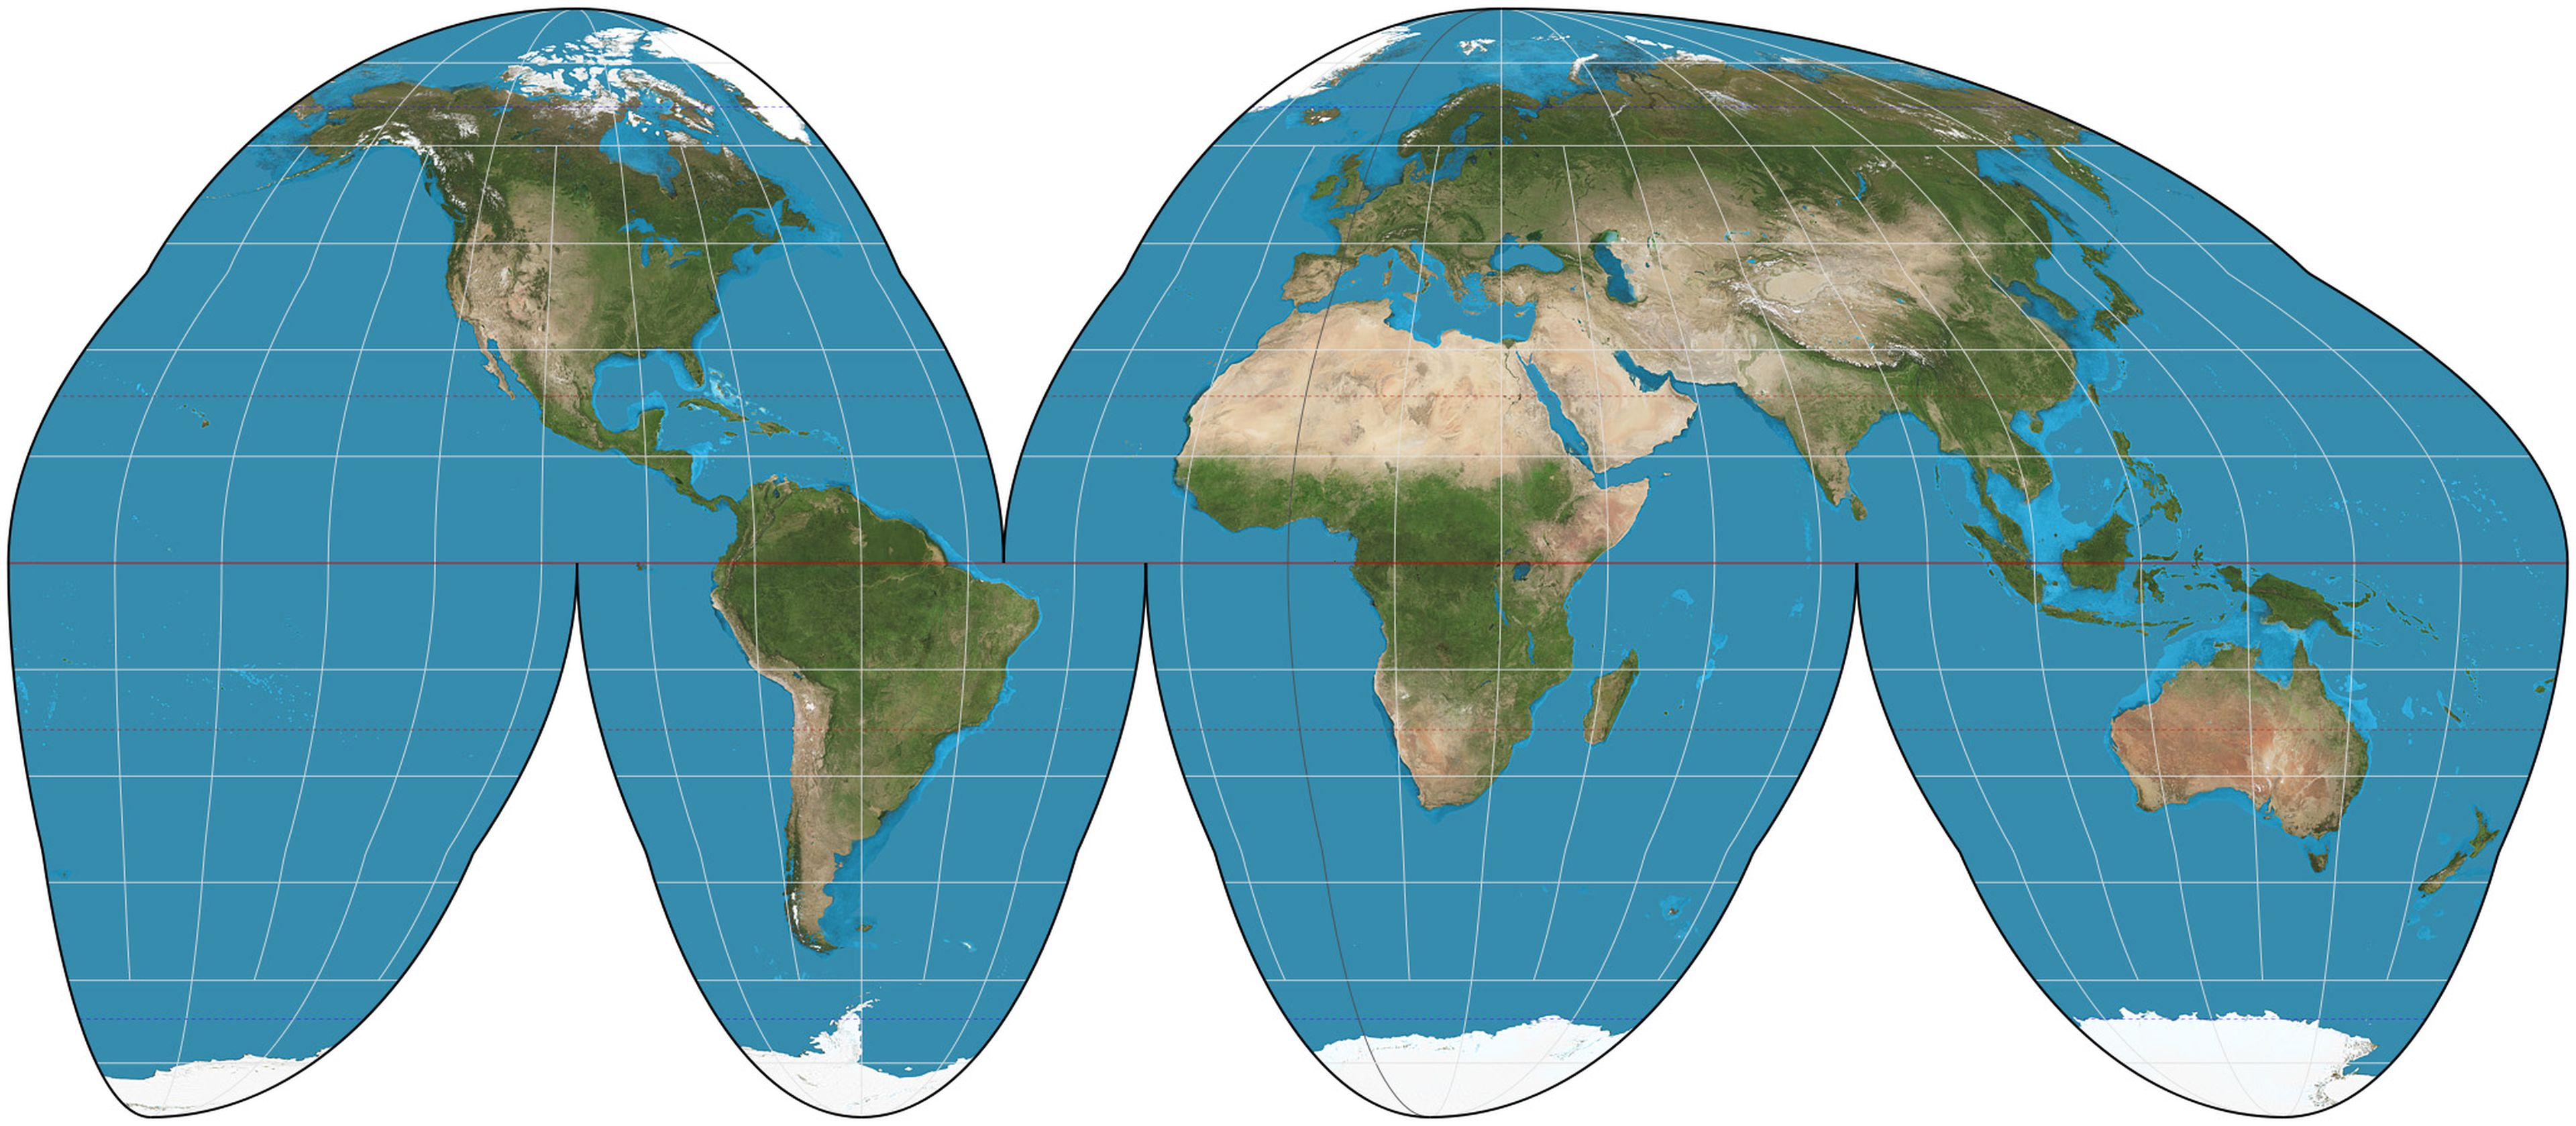 Earth map with cartographic projection